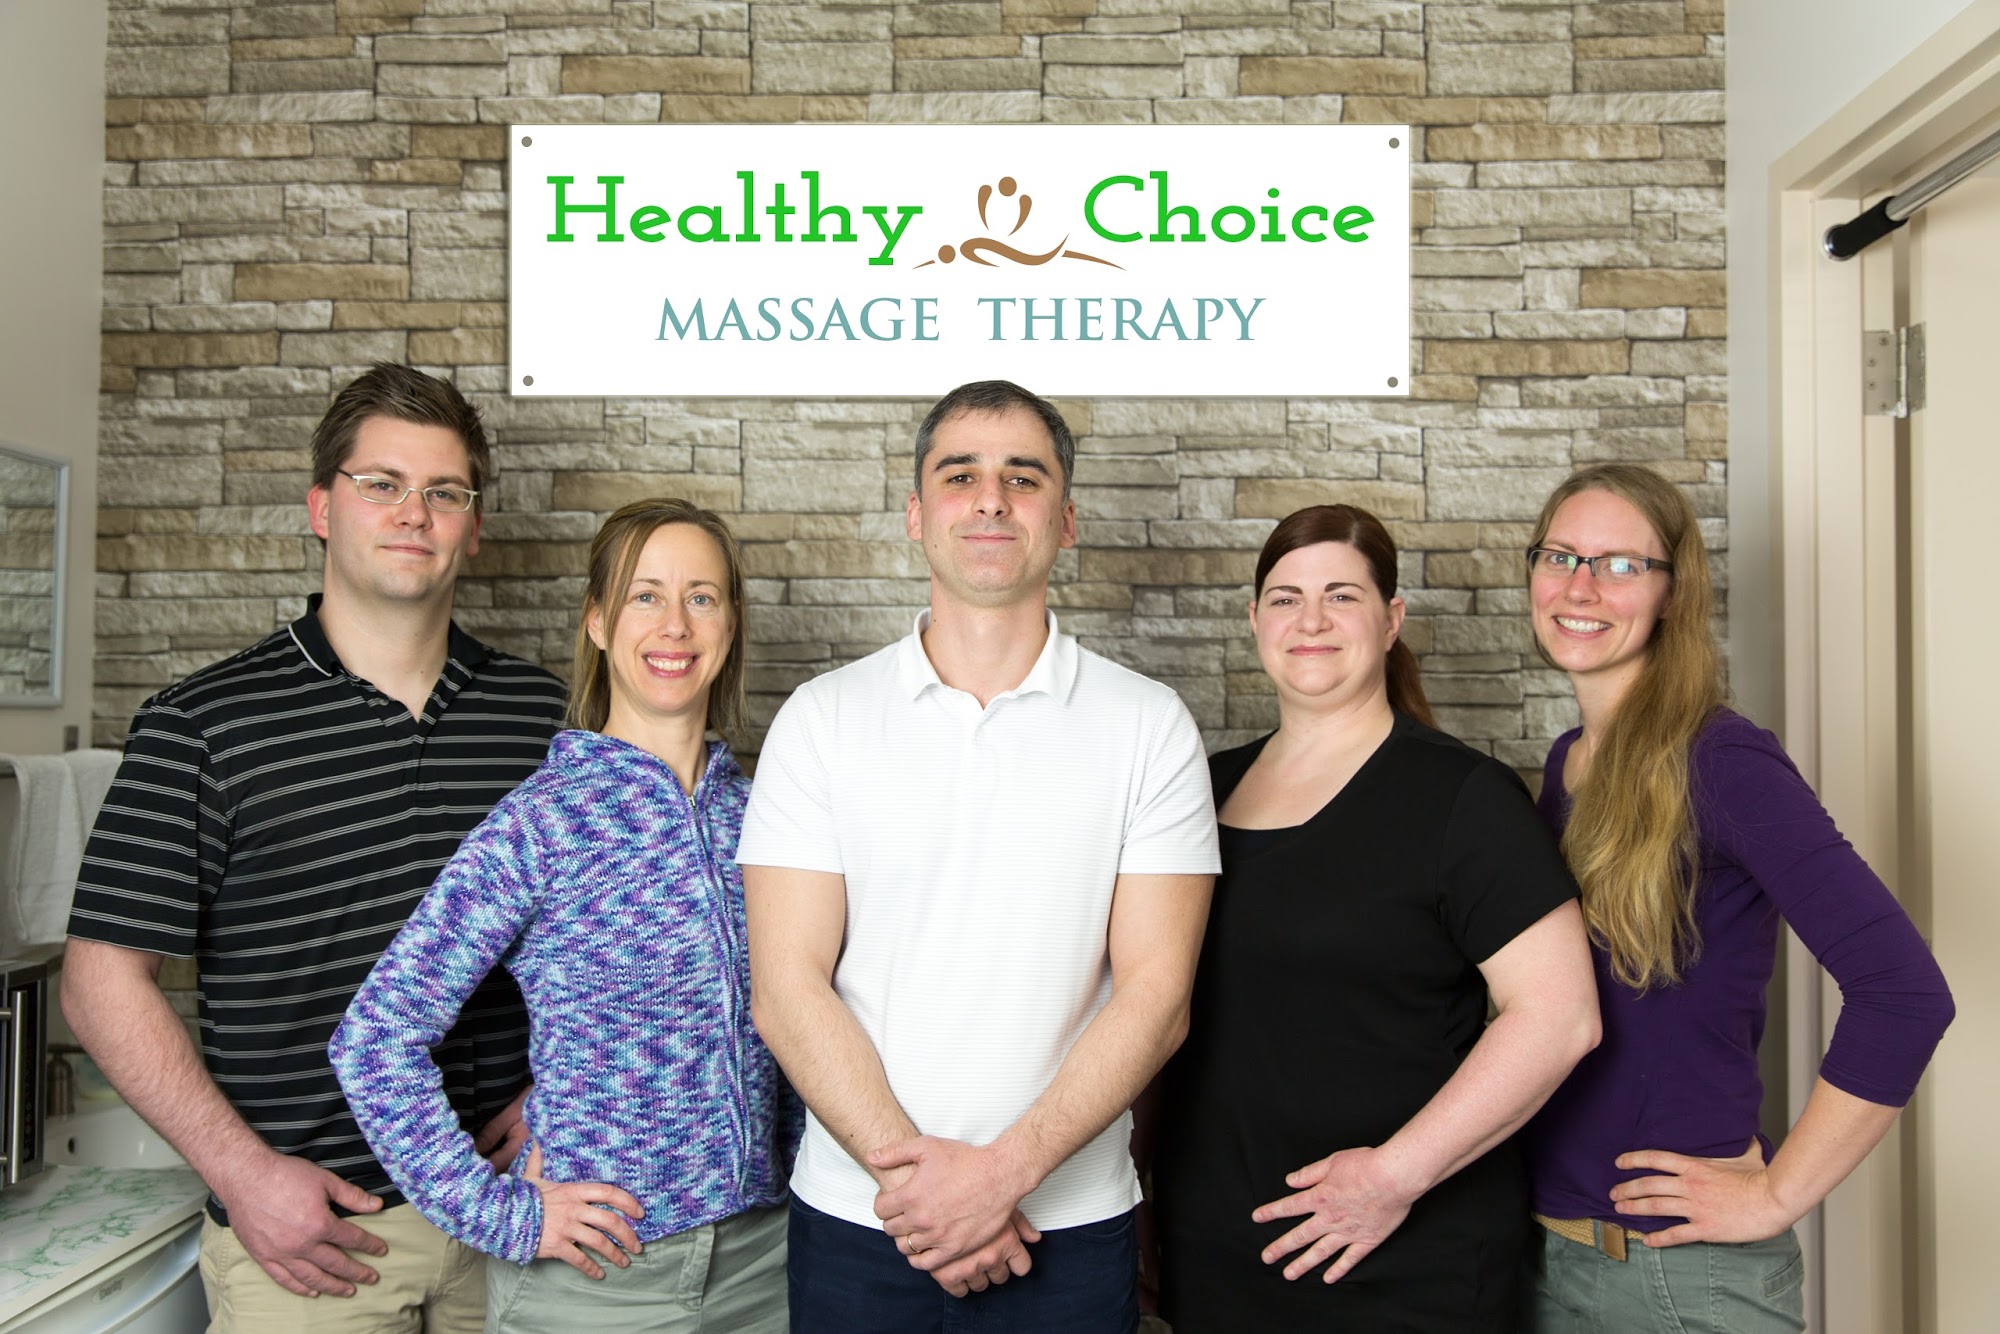 Healthy Choice Massage Therapy